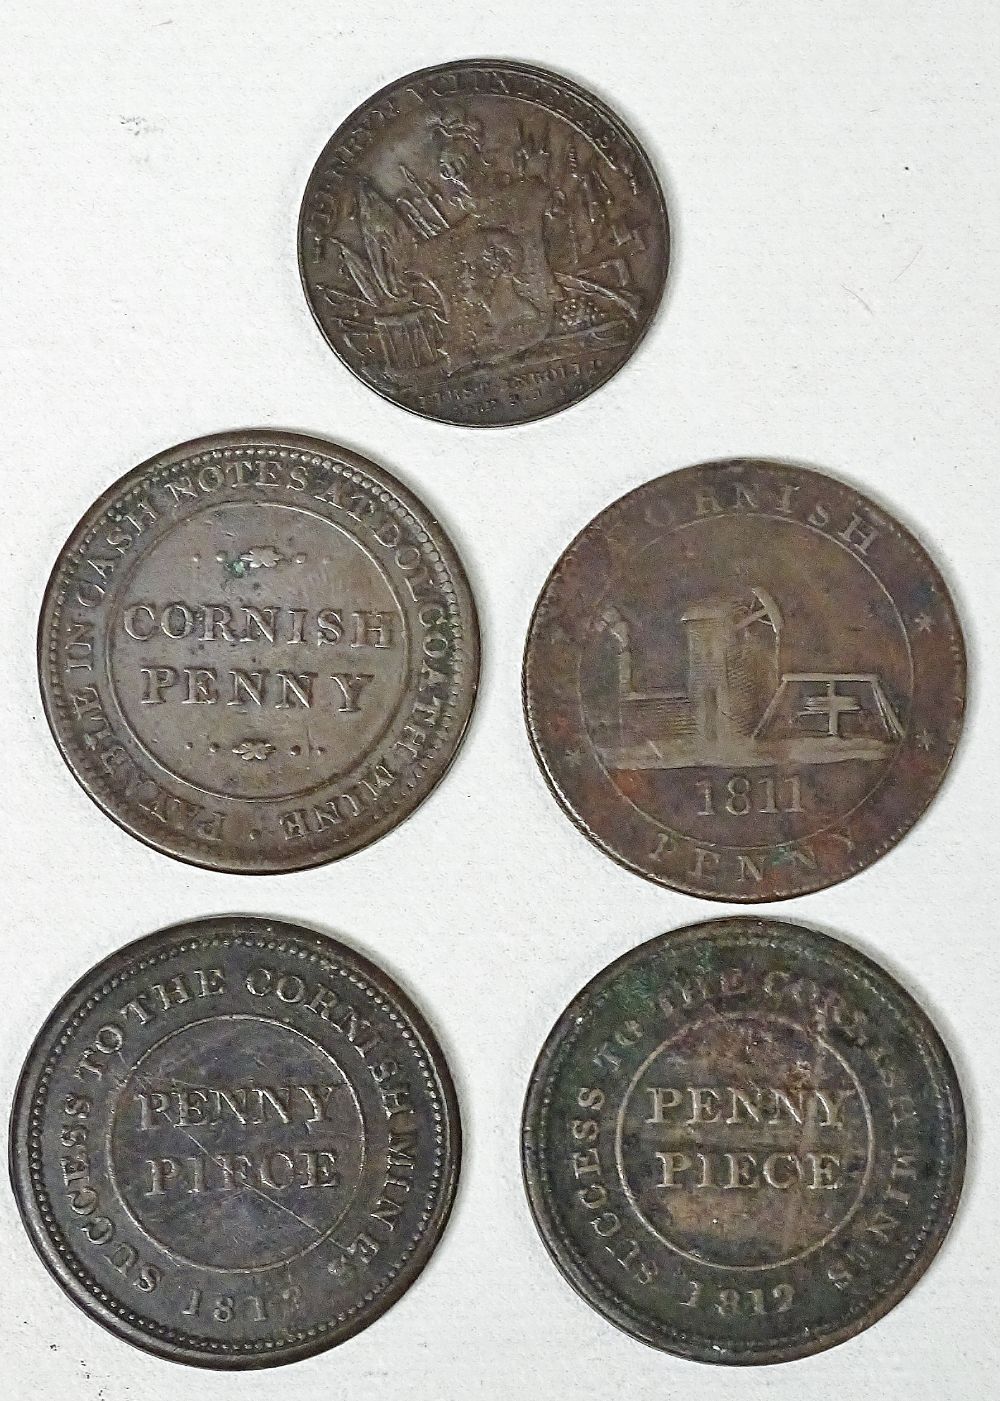 Cornish Trade Tokens - Penryn Volunteers First Inrolled April 3 1794, Penny Piece Success to the